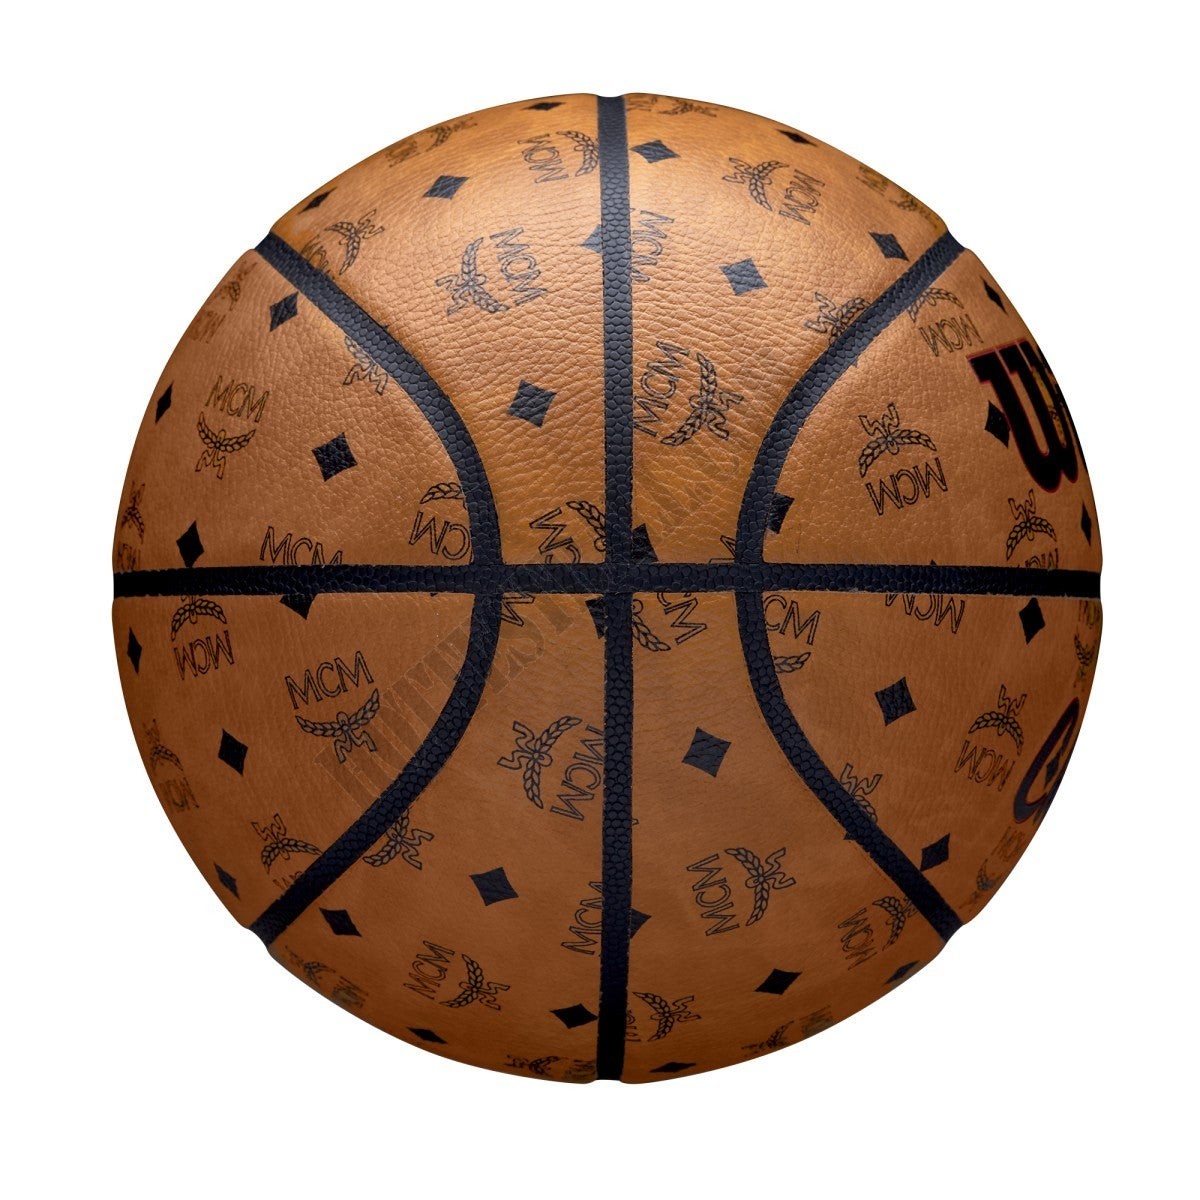 MCM x Chicago Limited Edition Basketball - Wilson Discount Store - -6